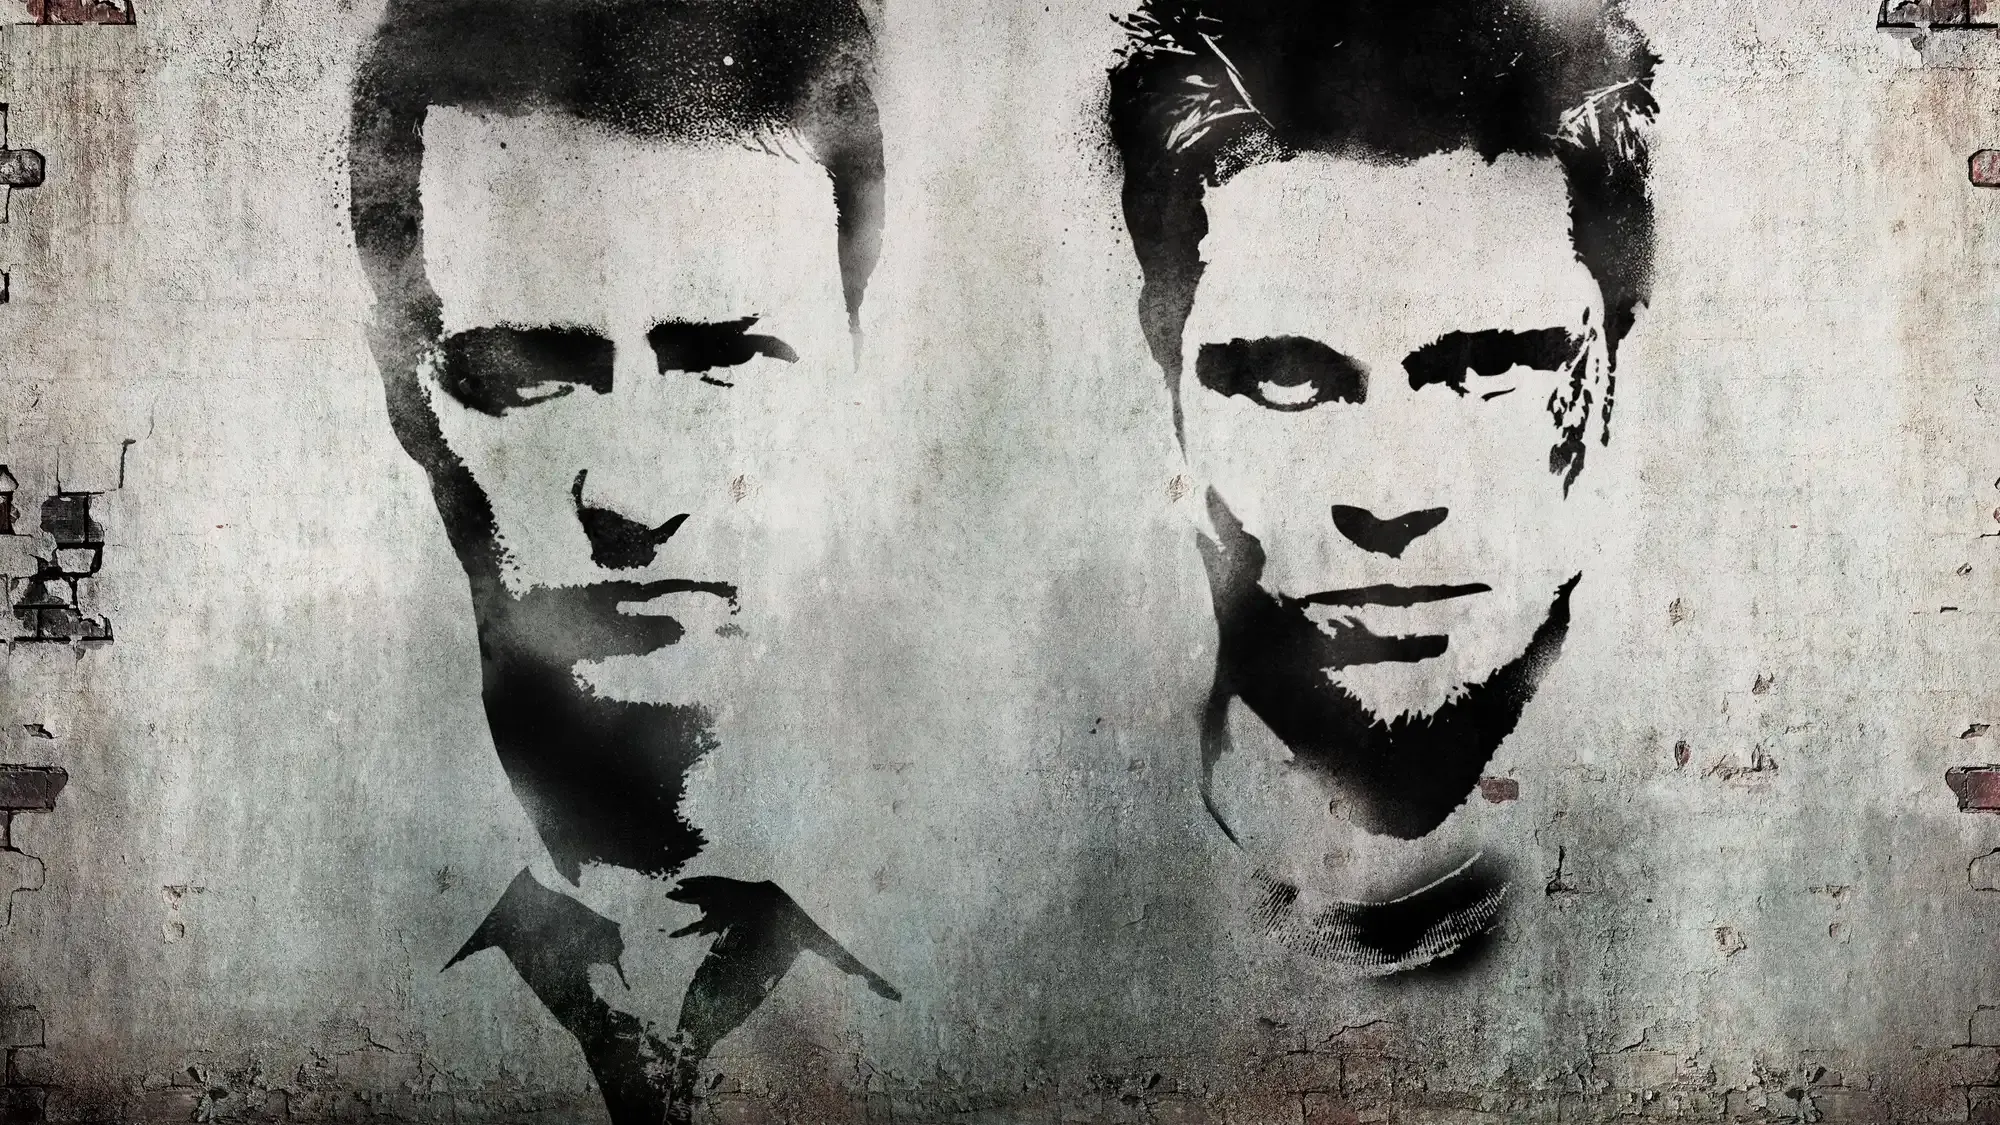 Fight Club movie review